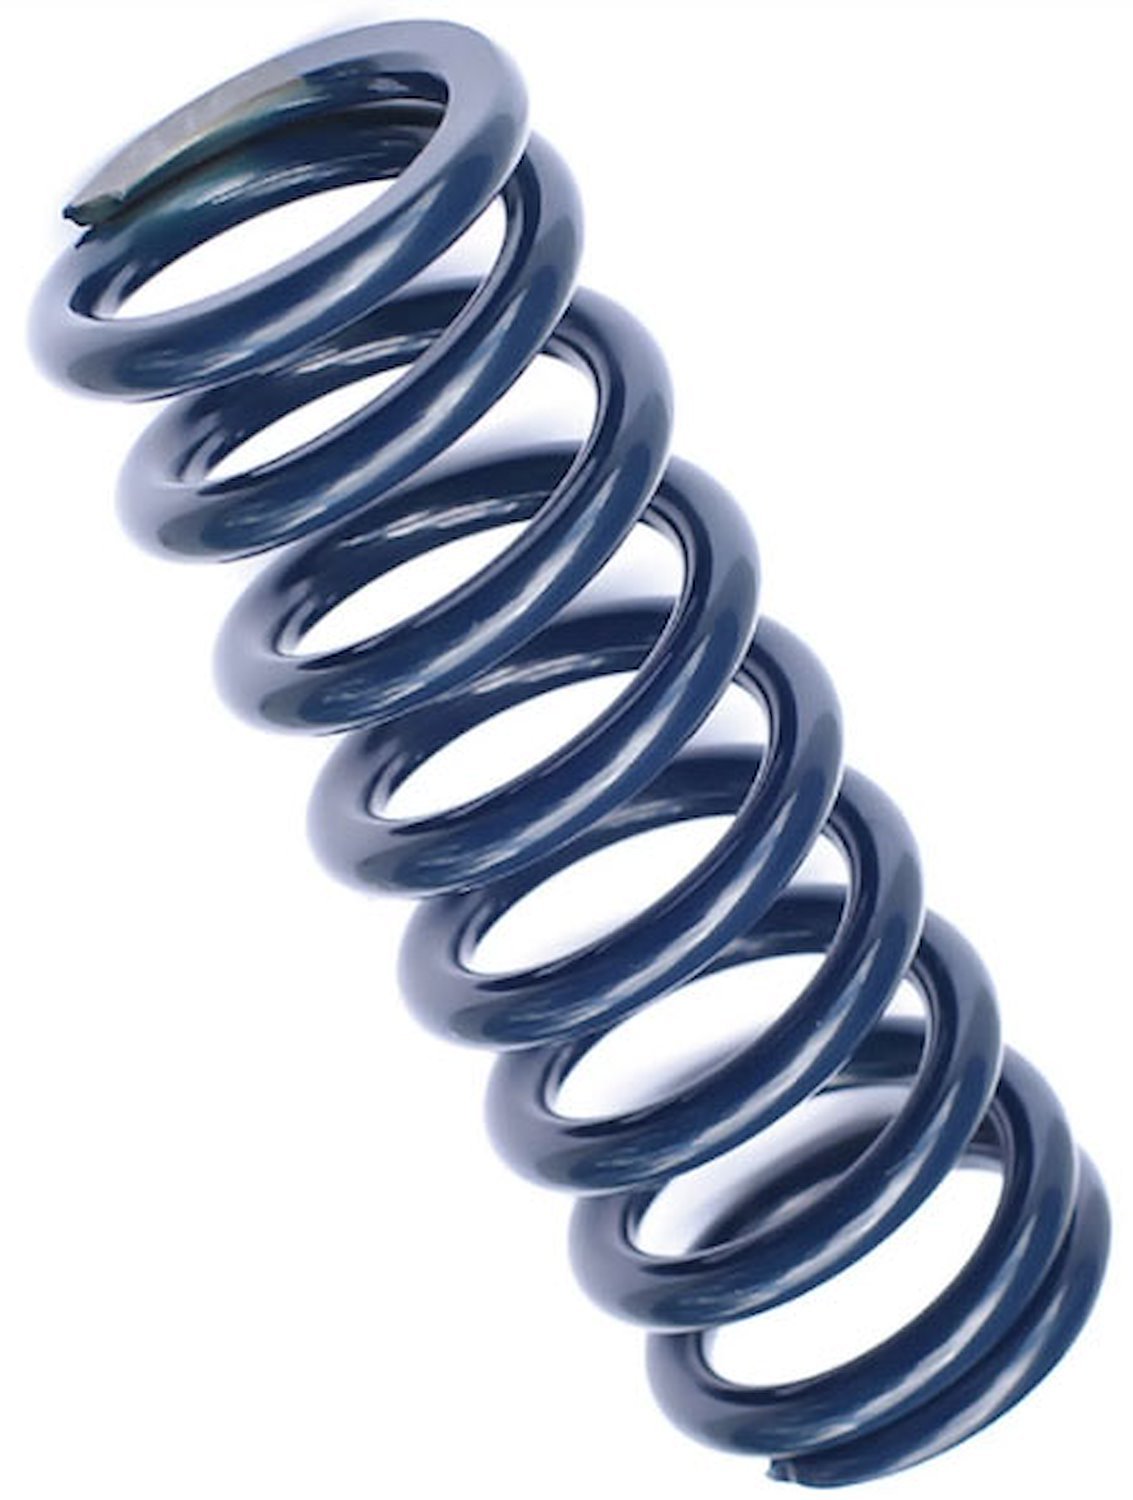 Coil-Over Spring 850 lb. Spring Rate [10 in. Free Length]